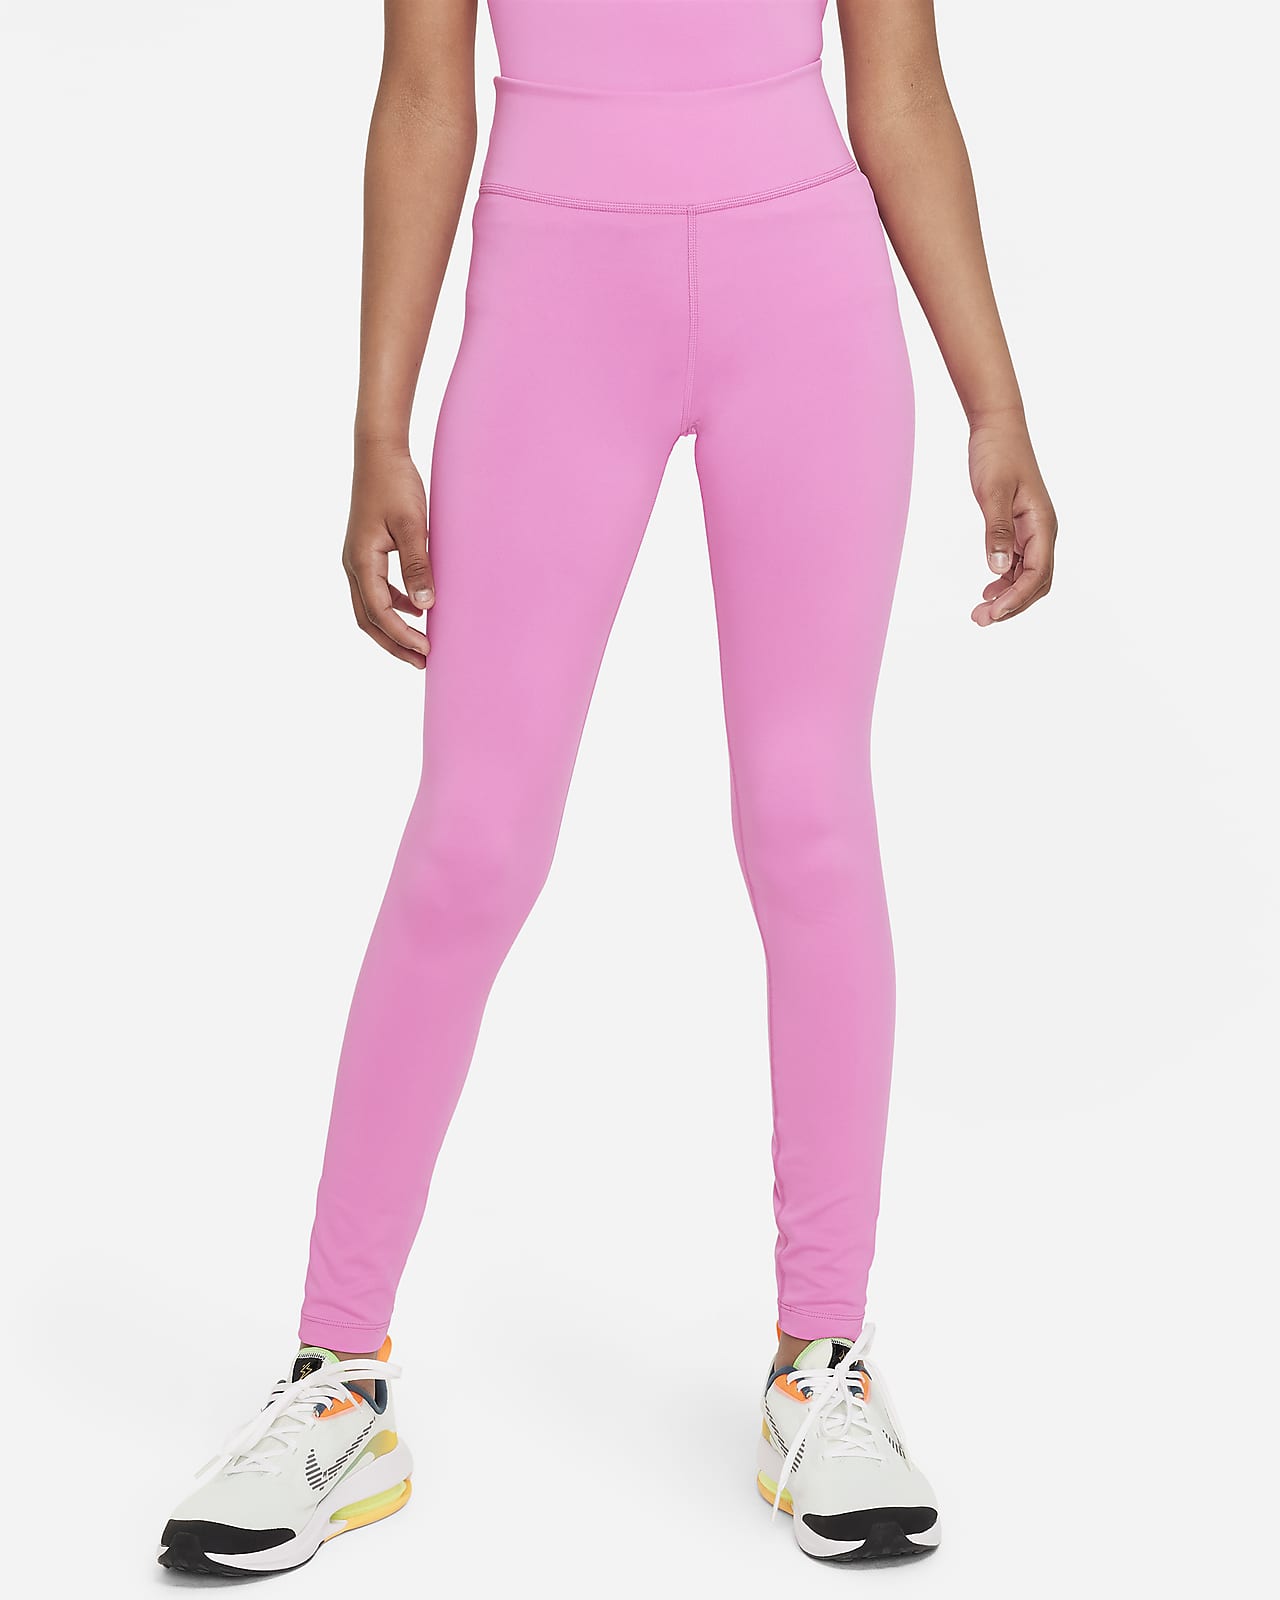 Teen Collection Mid Rise Pink Tights & Leggings.